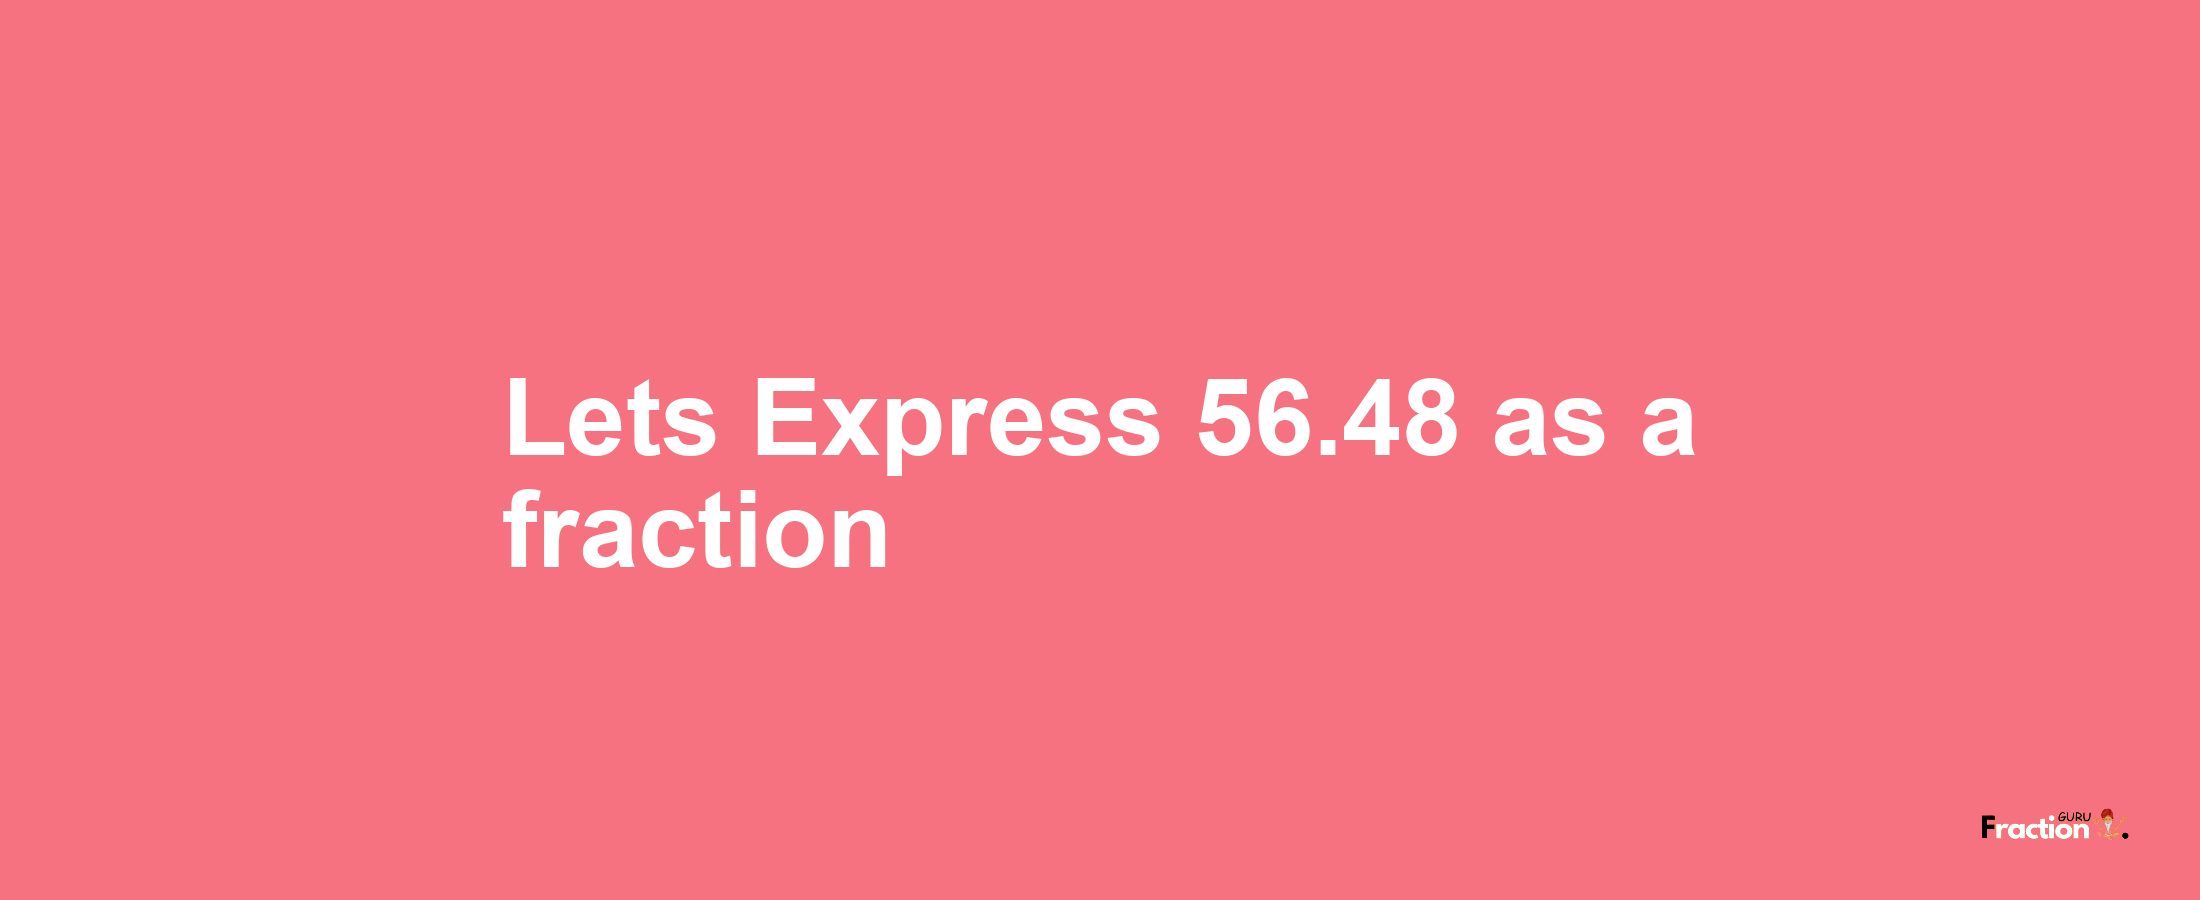 Lets Express 56.48 as afraction